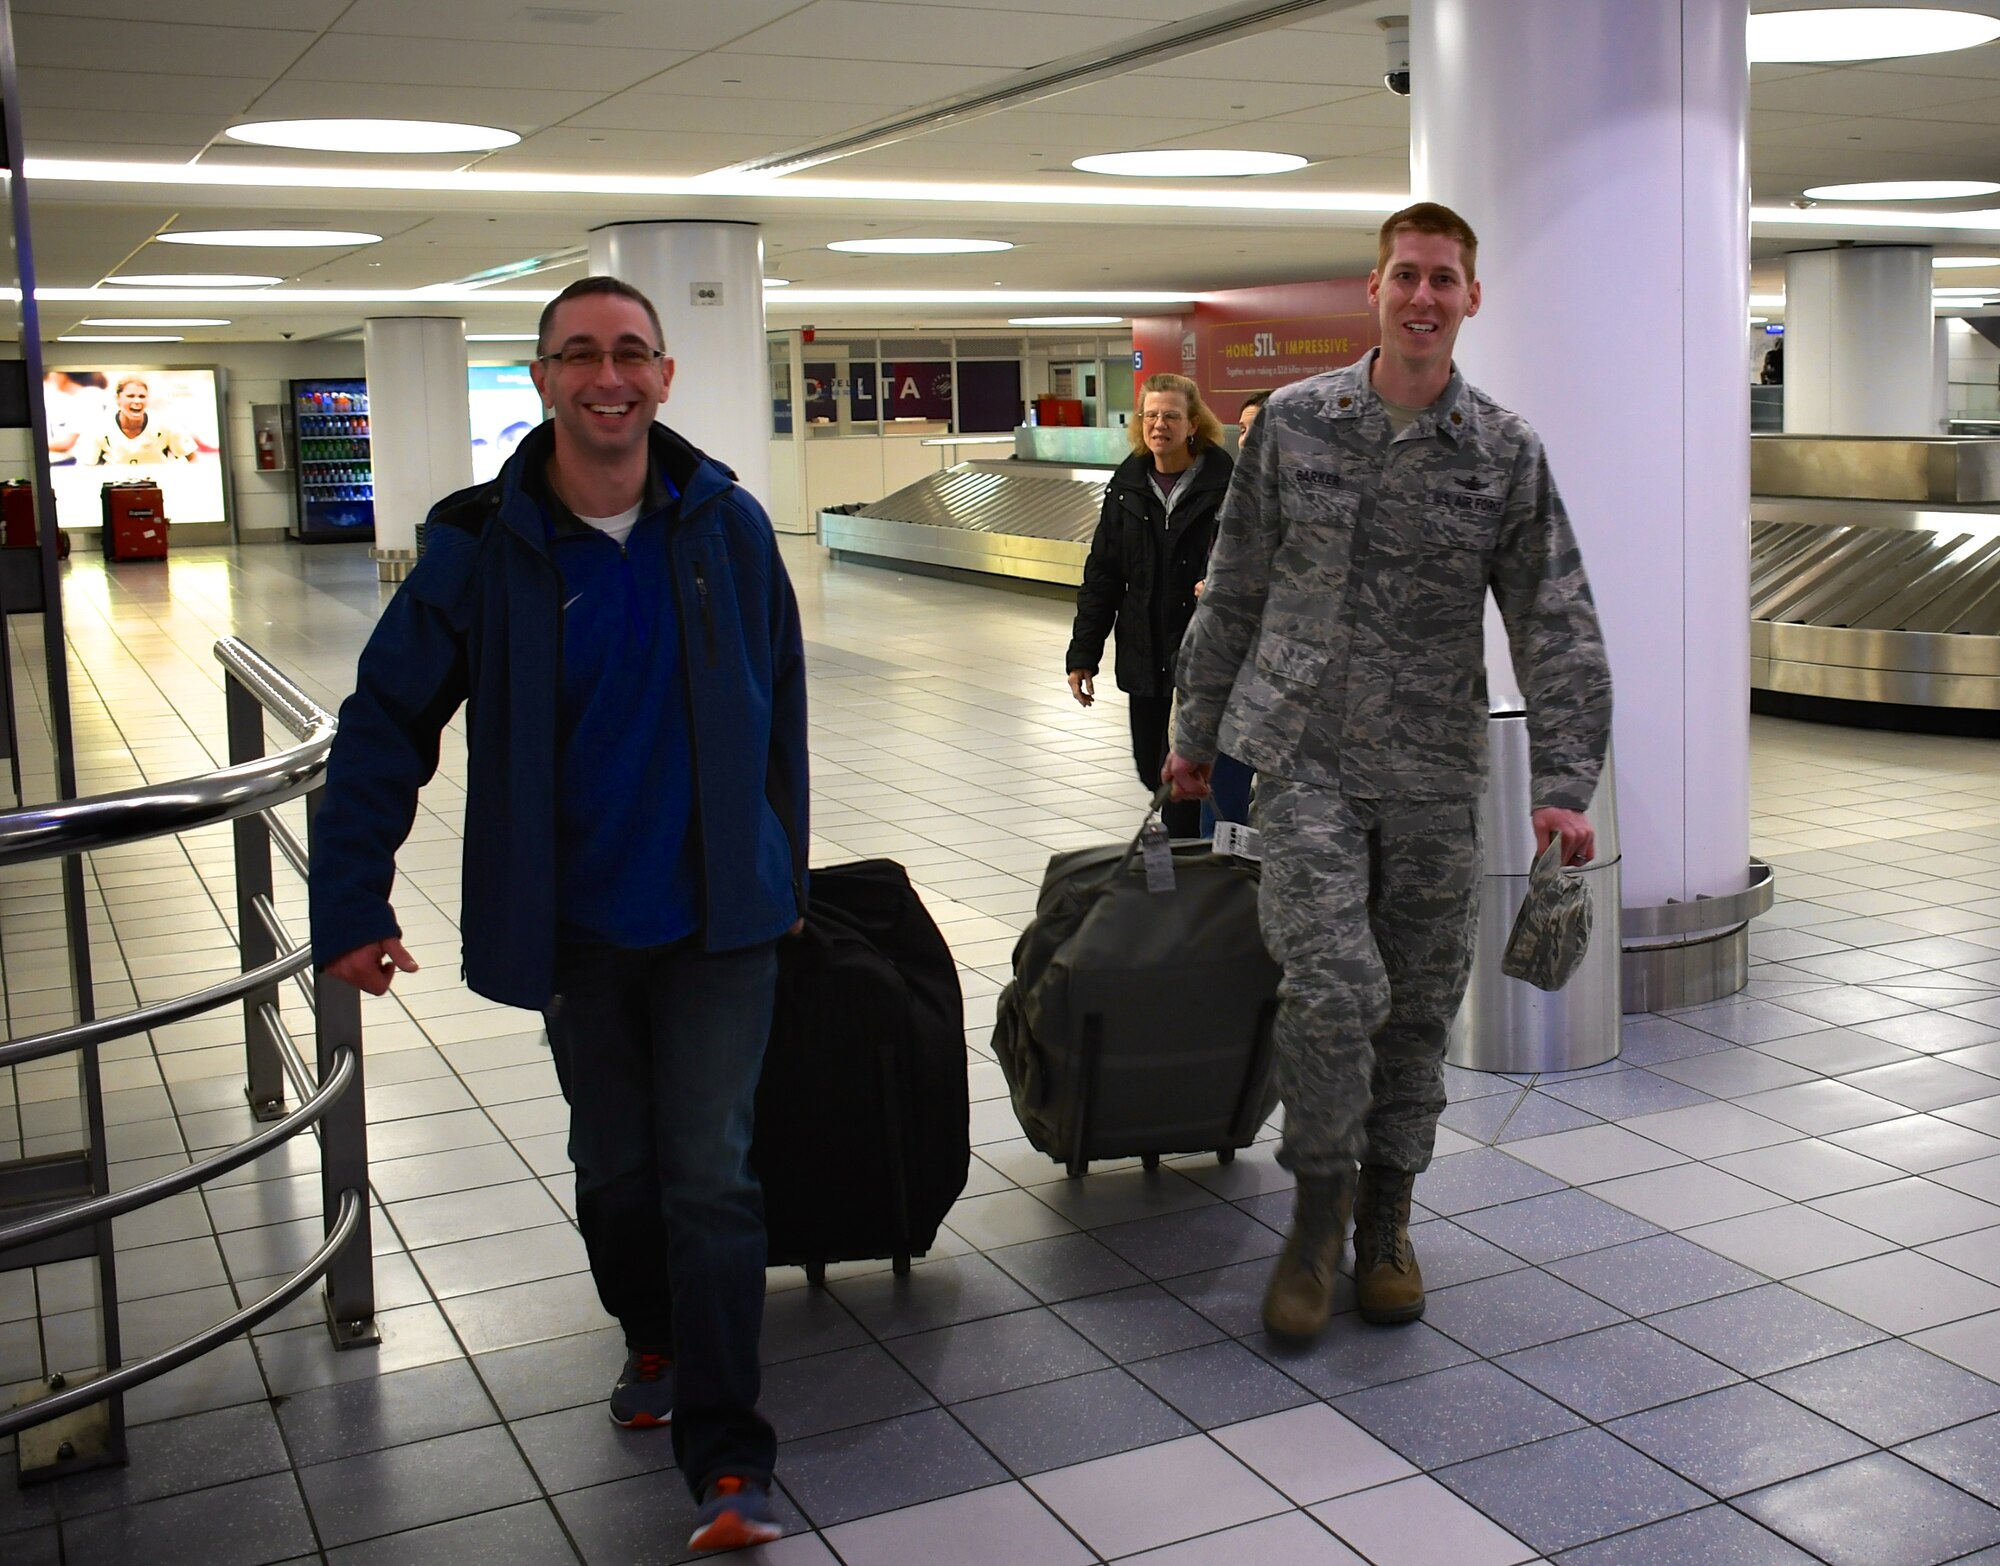 932nd Airlift Wing staff members welcomed back several Airmen from temporary duties recently, including deployer Chaplain (Maj.) Michael Williams, at left. Shaking hands then helping carry his luggage upon arrival back in Illinois on January 29, 2019, is Maj. Luke Barker, the 932nd AW Director of Staff. The 932nd Airlift Wing is a 22nd Air Force unit, under Air Force Reserve Command.  The "Gateway Wing" unit is located at Scott Air Force Base, Illinois, not far from Saint Louis. (U.S. Air Force photo by Lt. Col Stan Paregien)